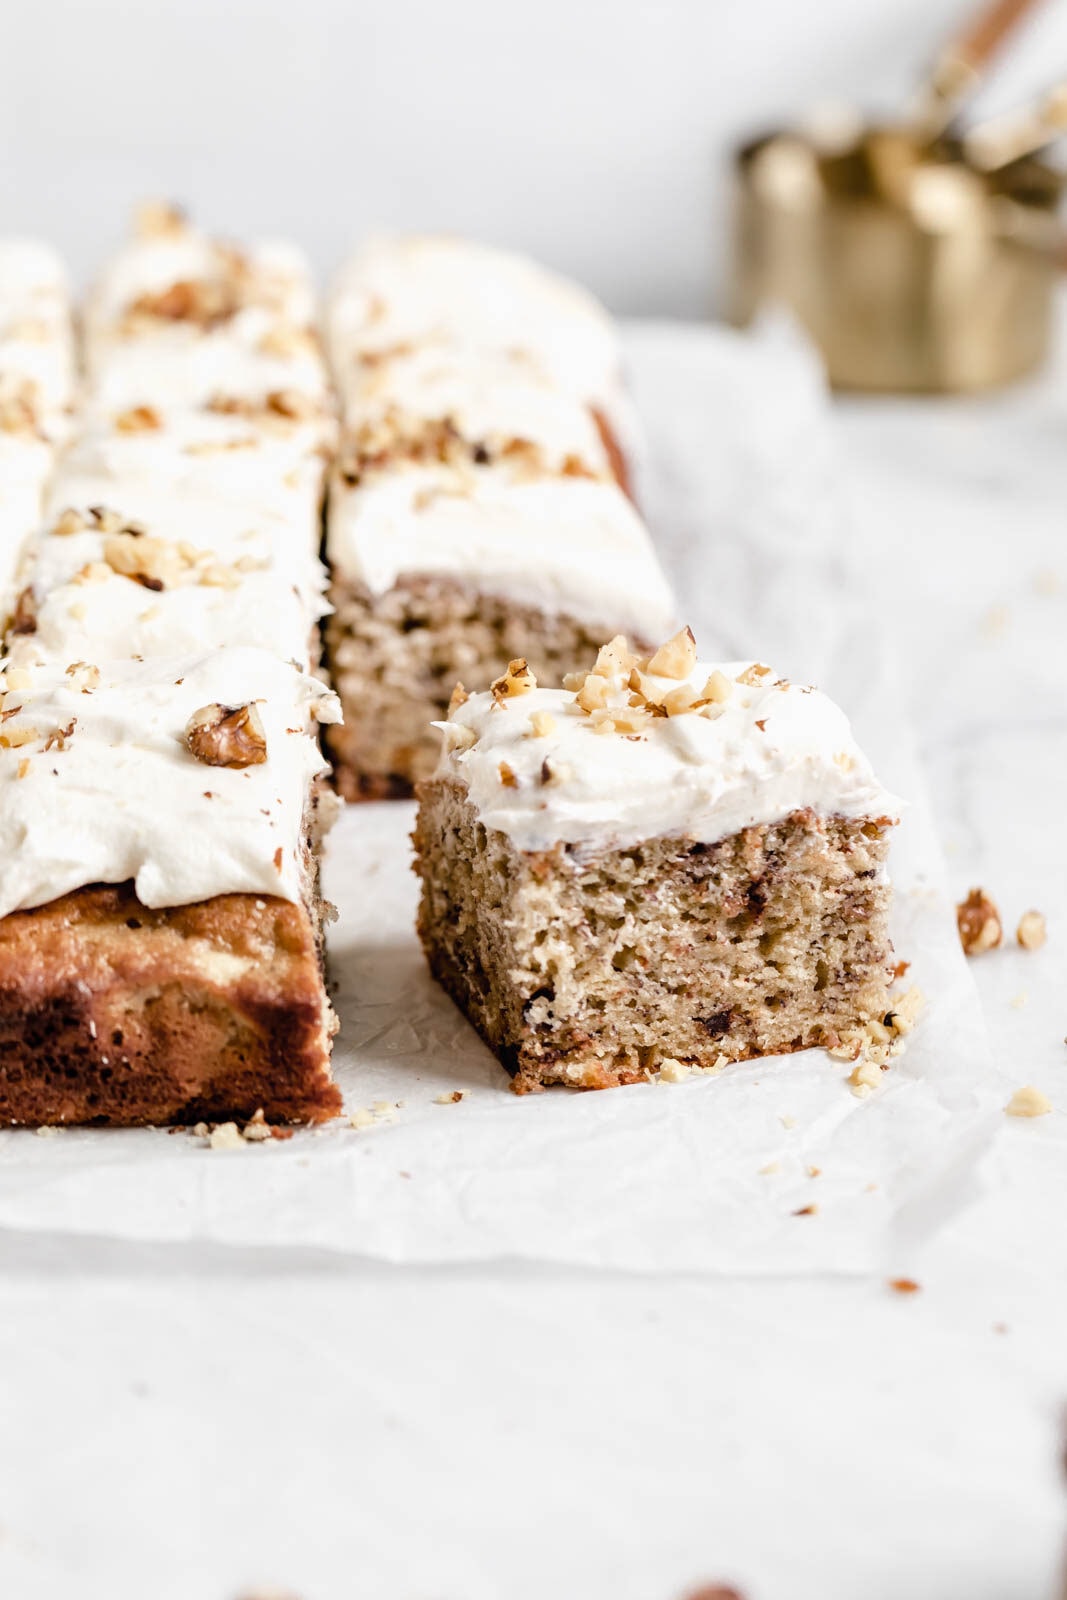 Brown butter banana chocolate chip sheet cake with cream cheese frosting has us drooling.Yum.